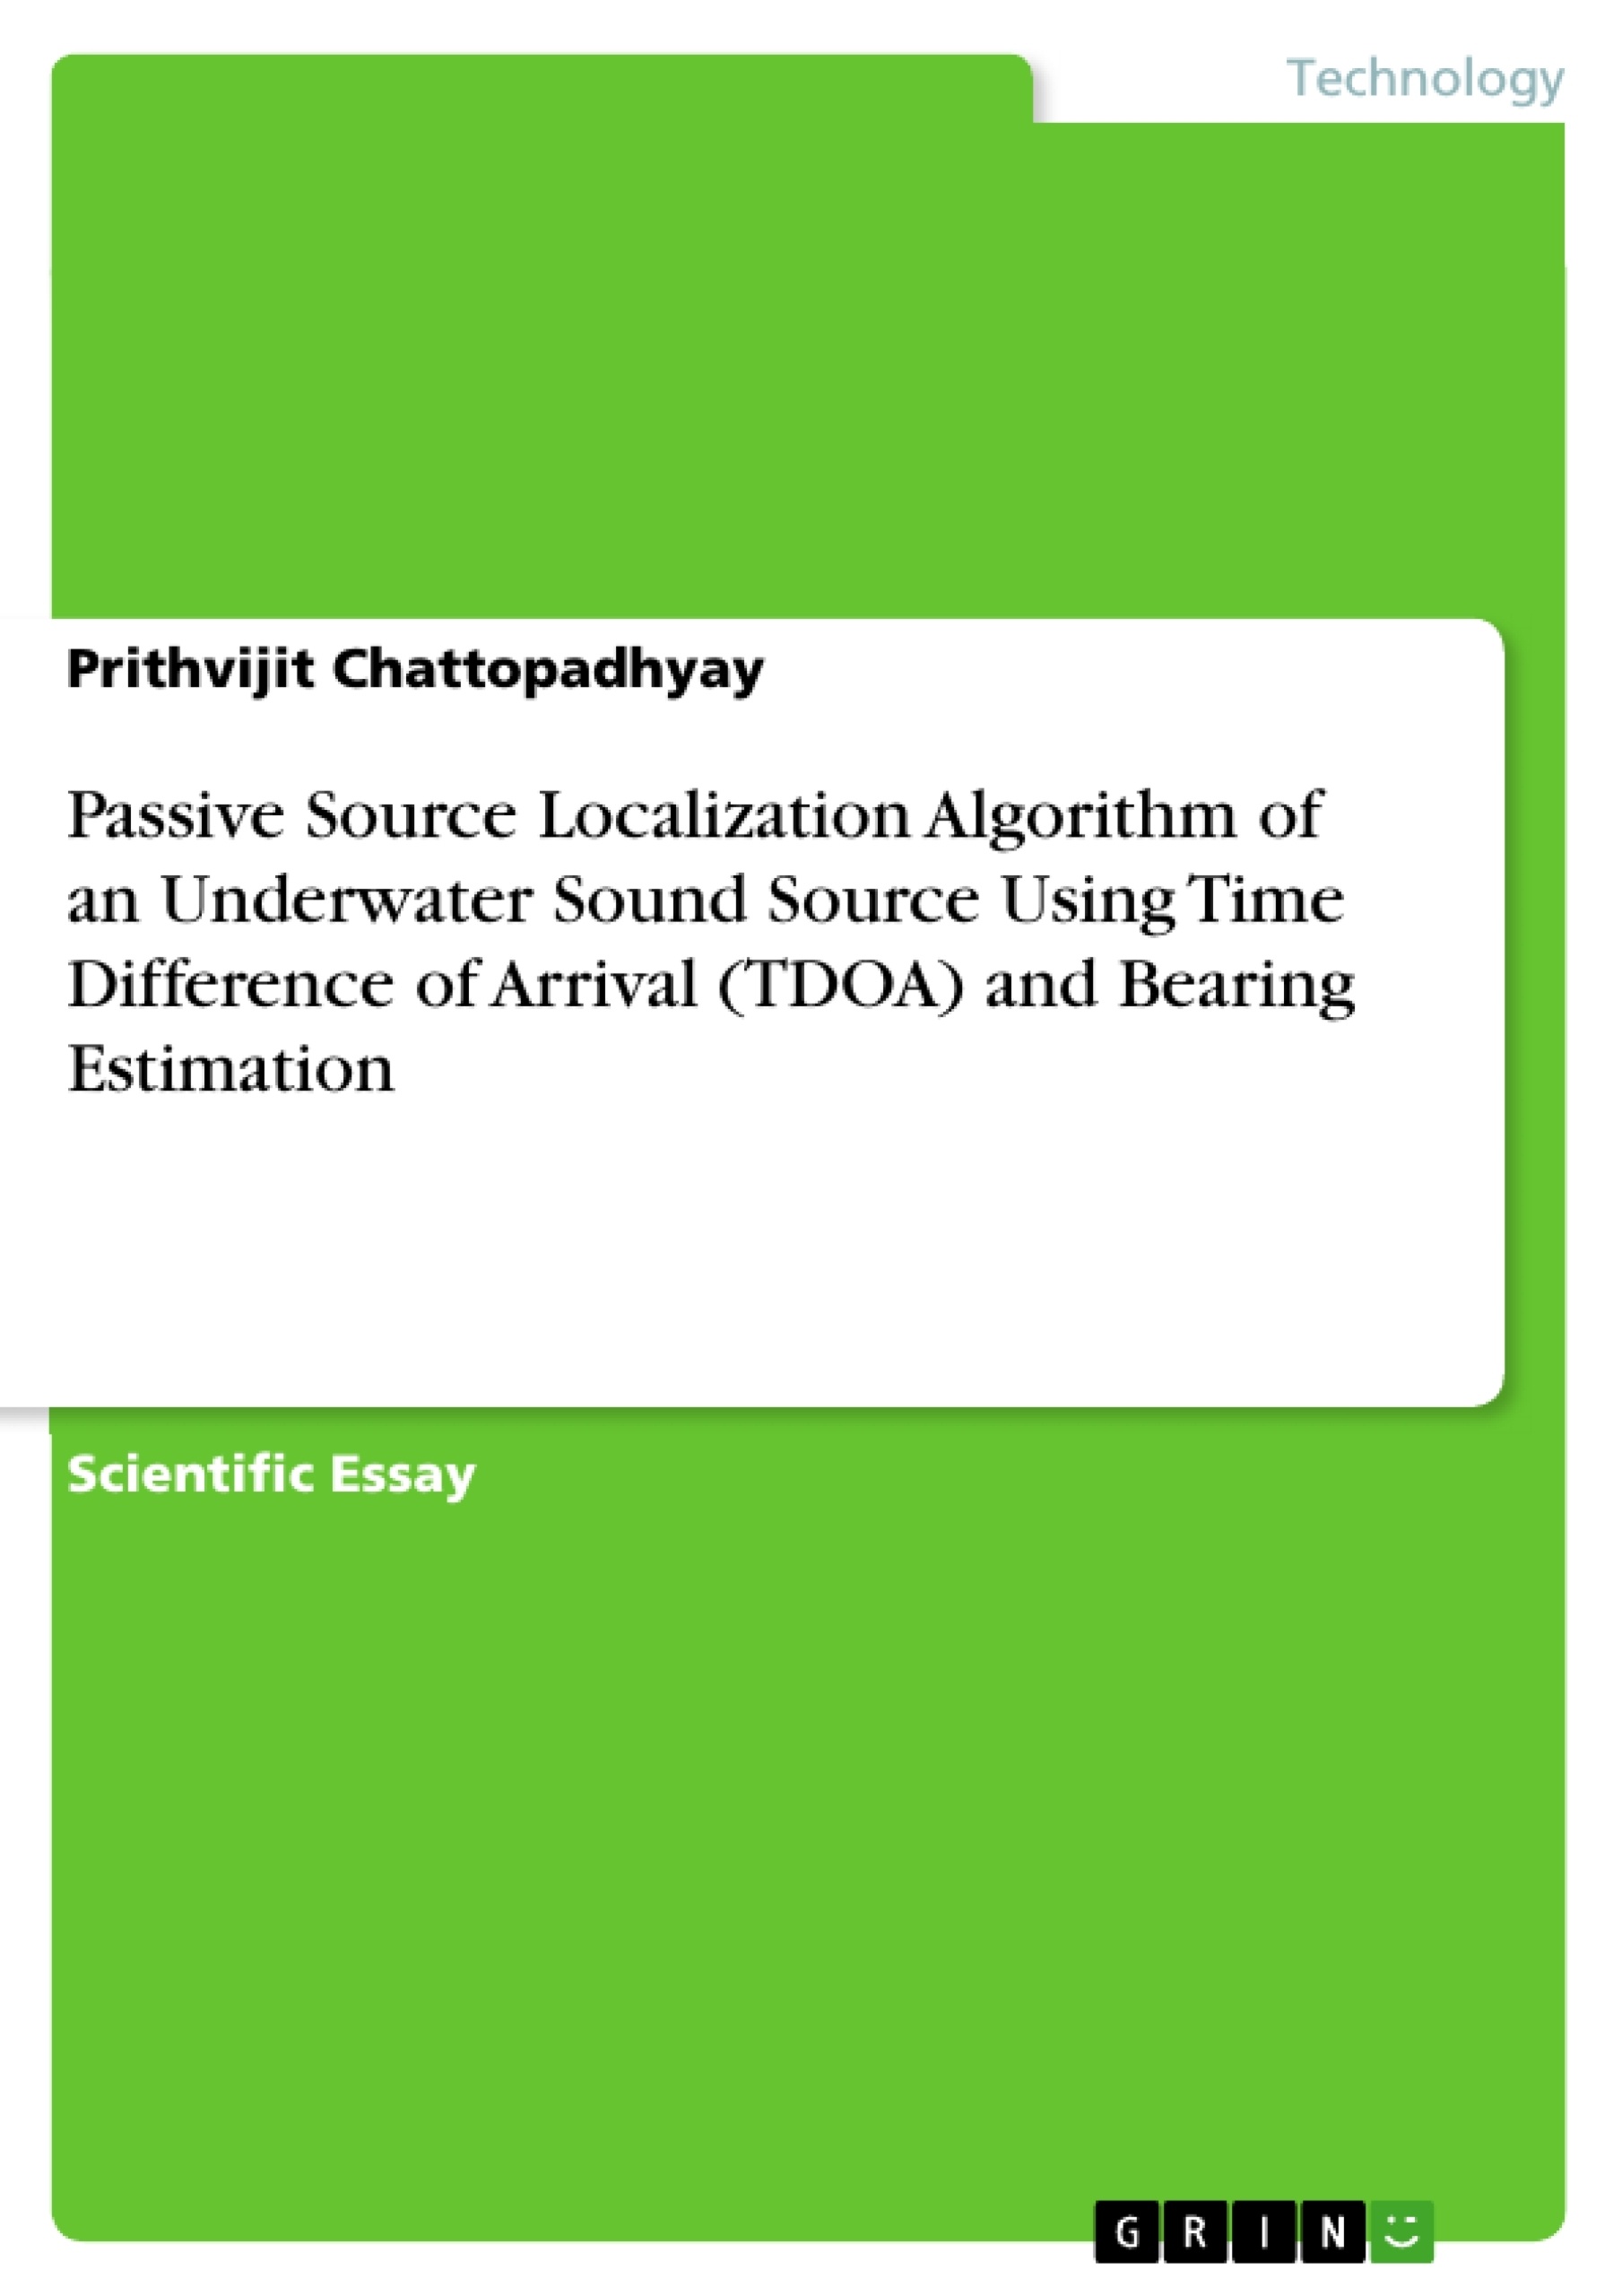 Titre: Passive Source Localization Algorithm of an Underwater Sound Source Using Time Difference of Arrival (TDOA) and Bearing Estimation